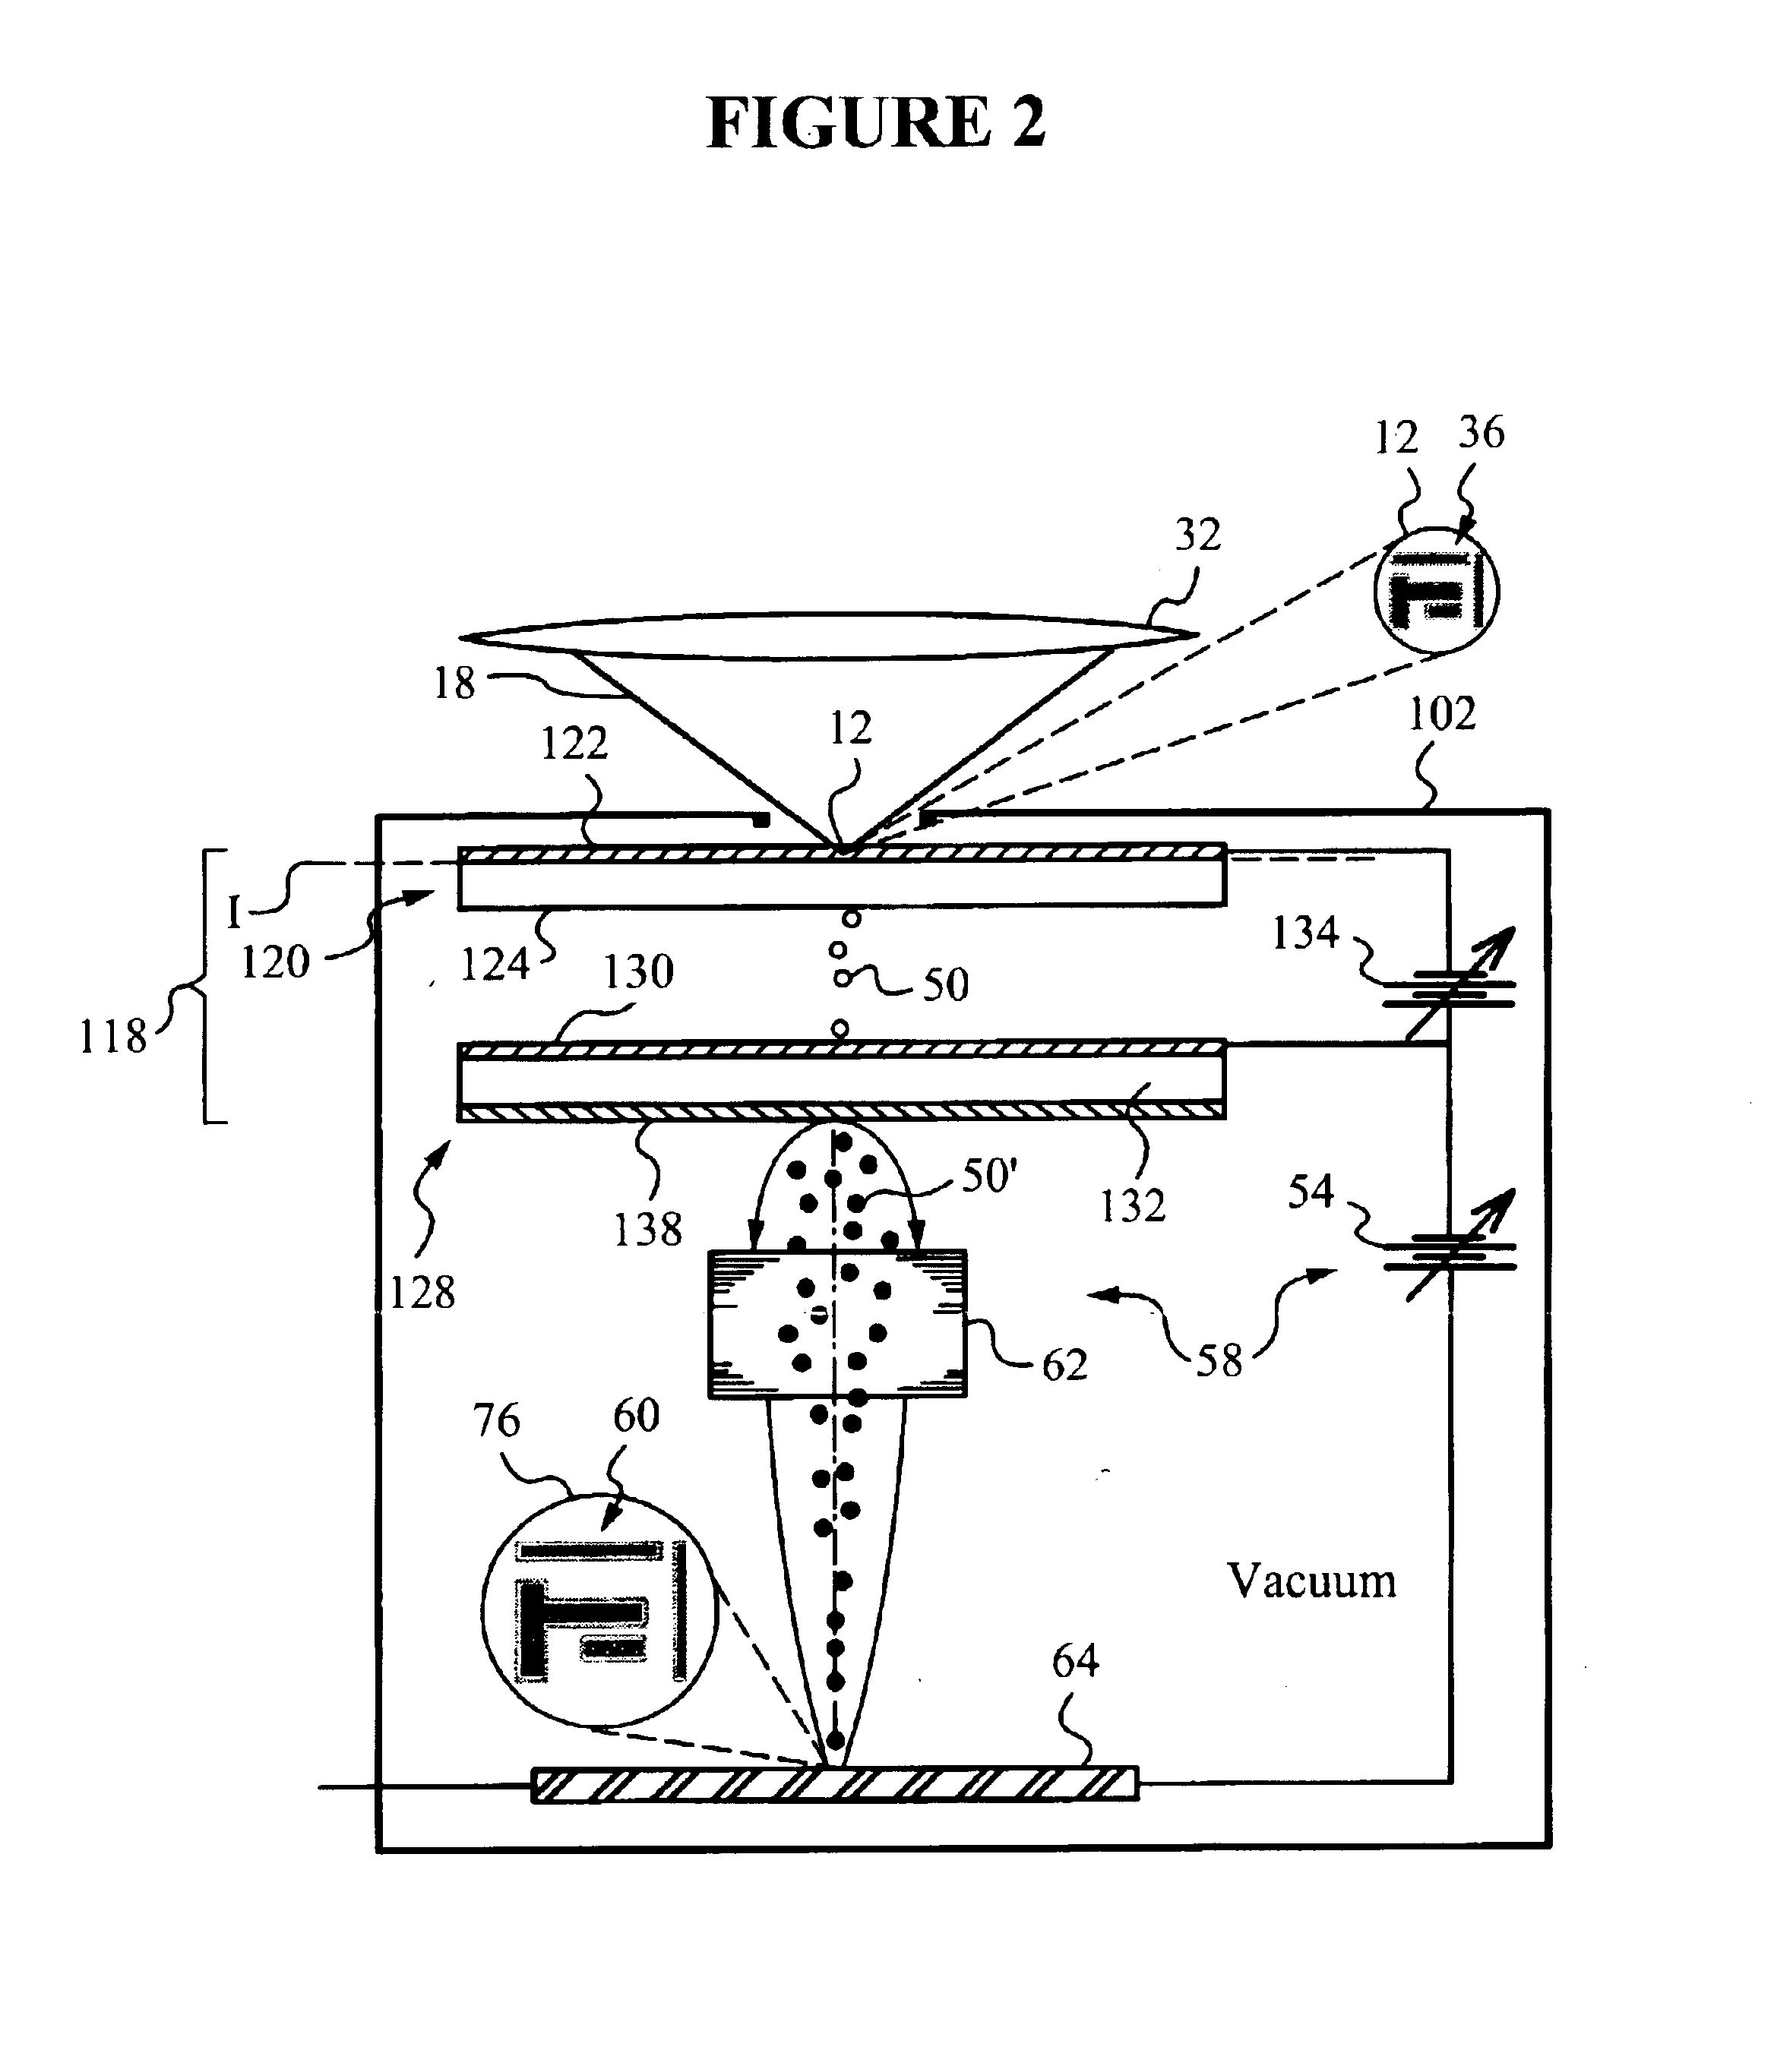 System and method for aerial image sensing